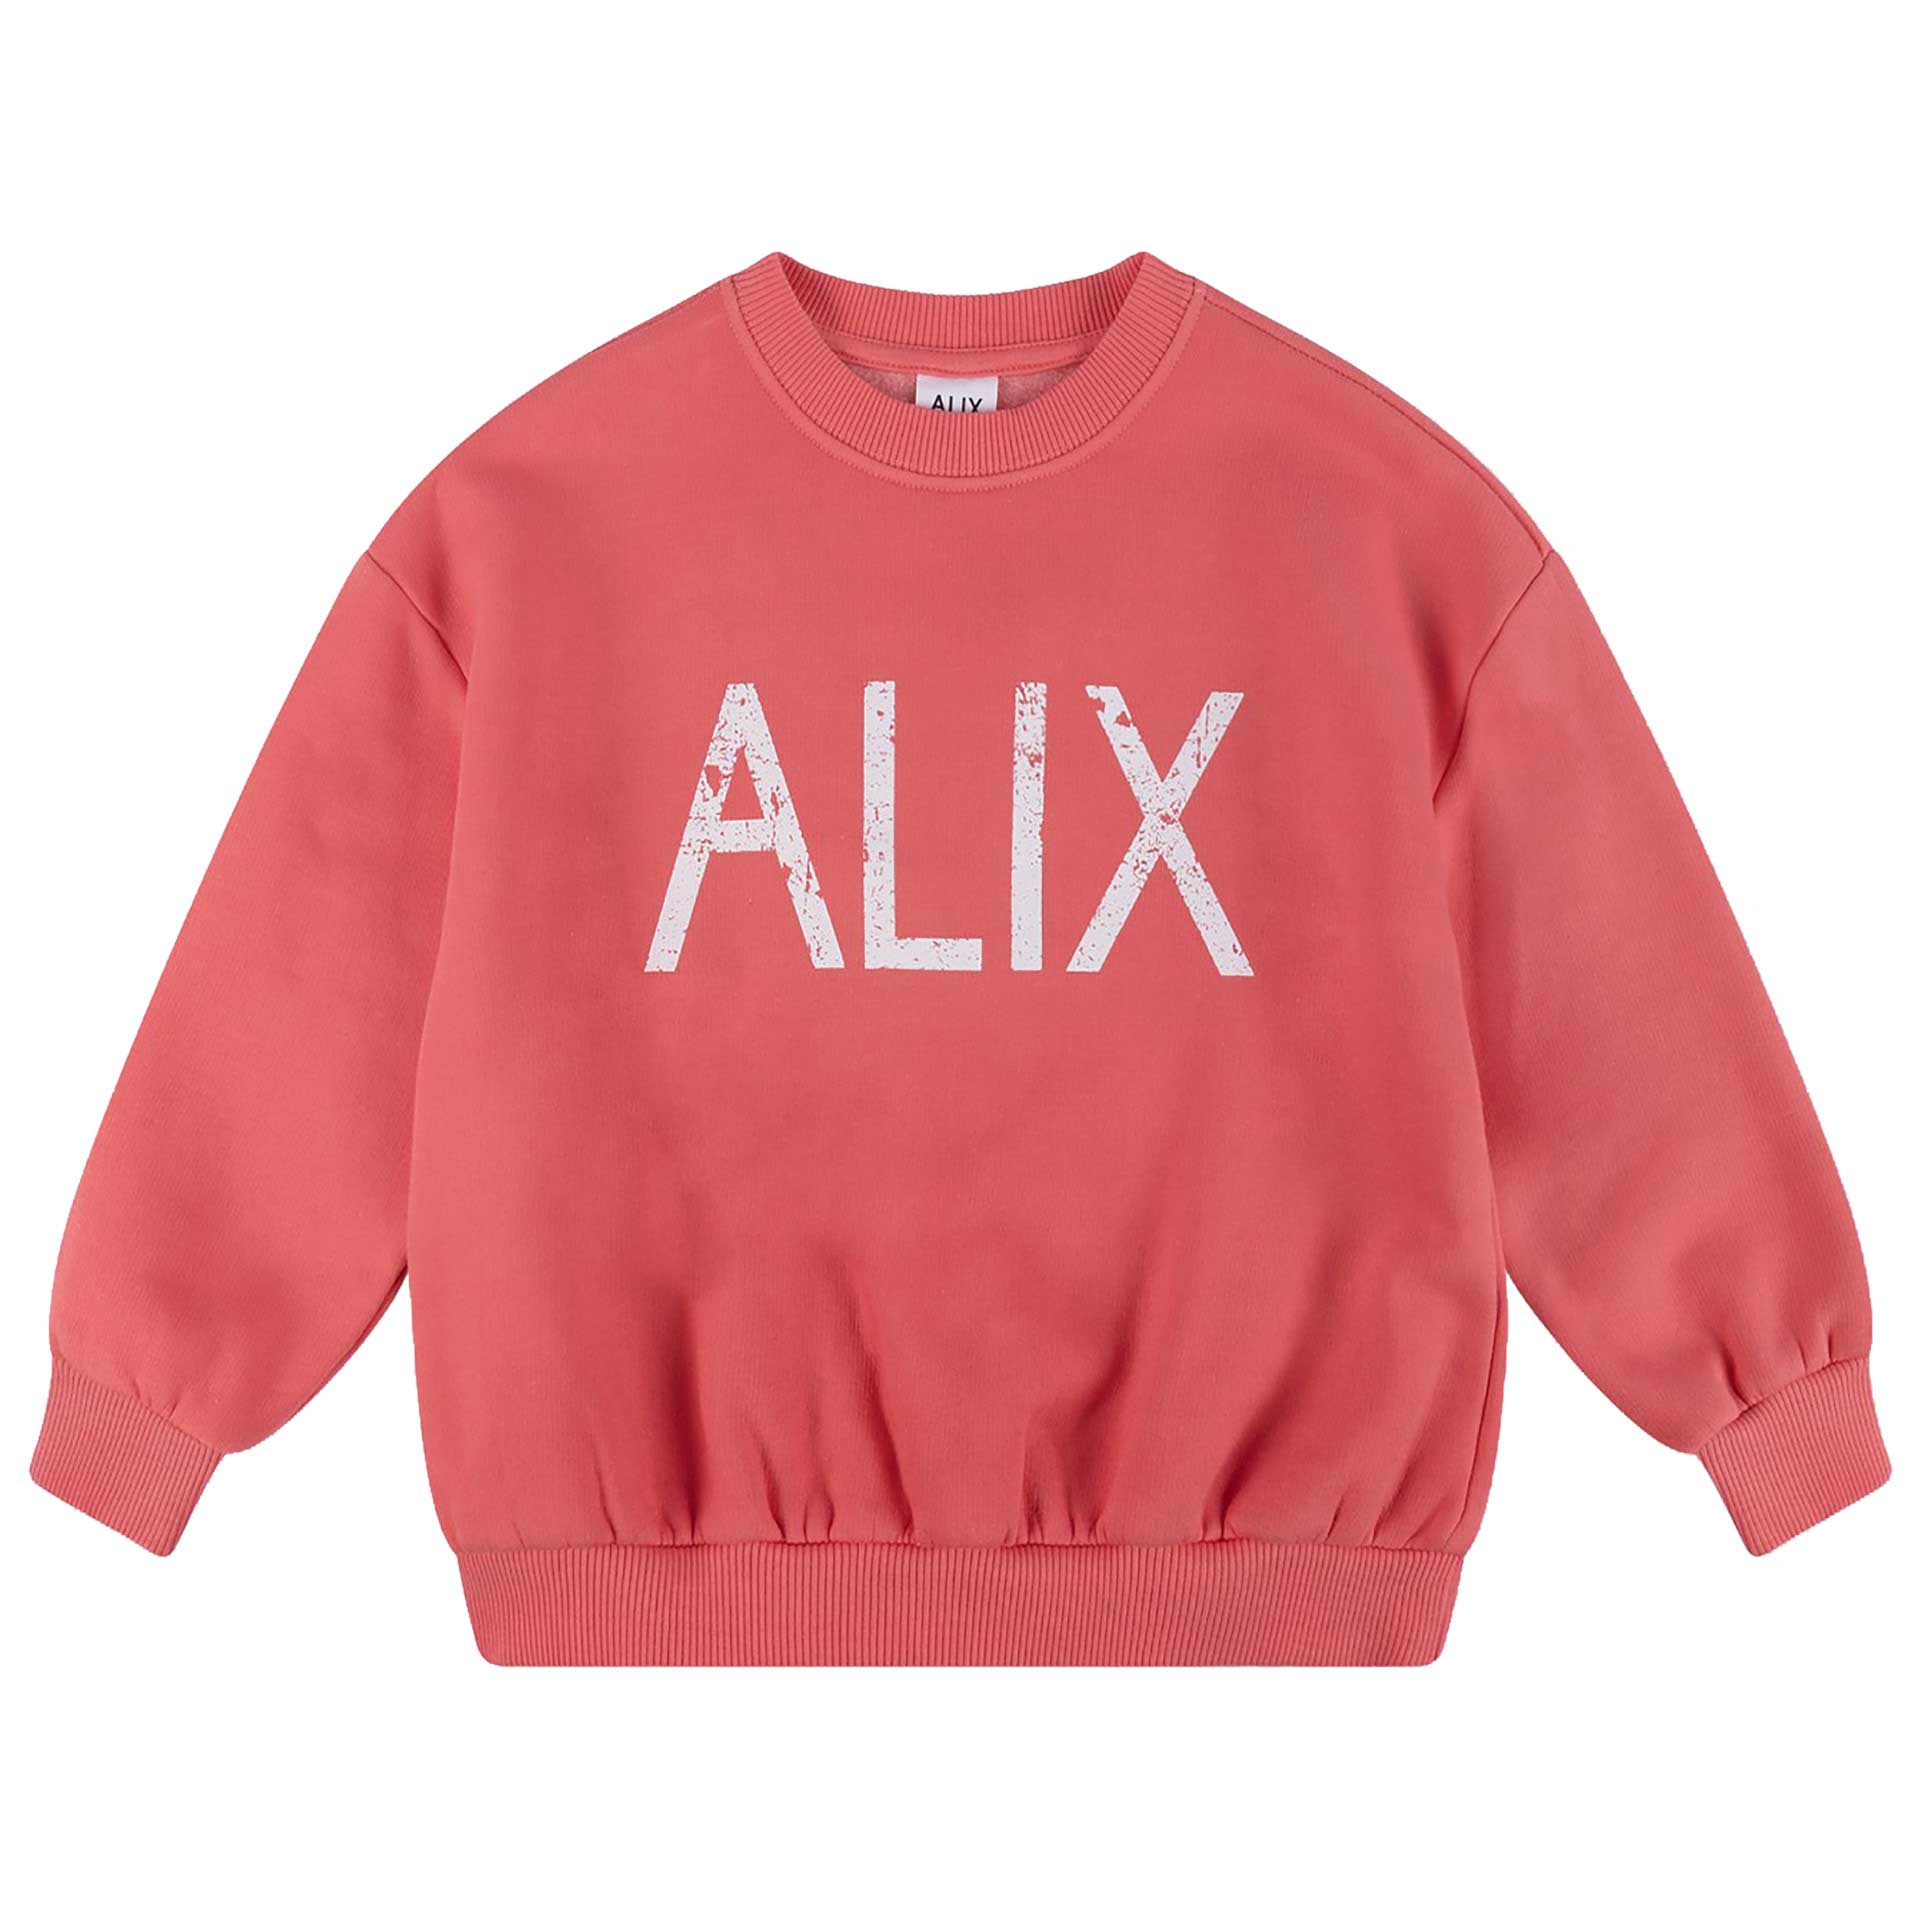 Alix Sweater knitted 2